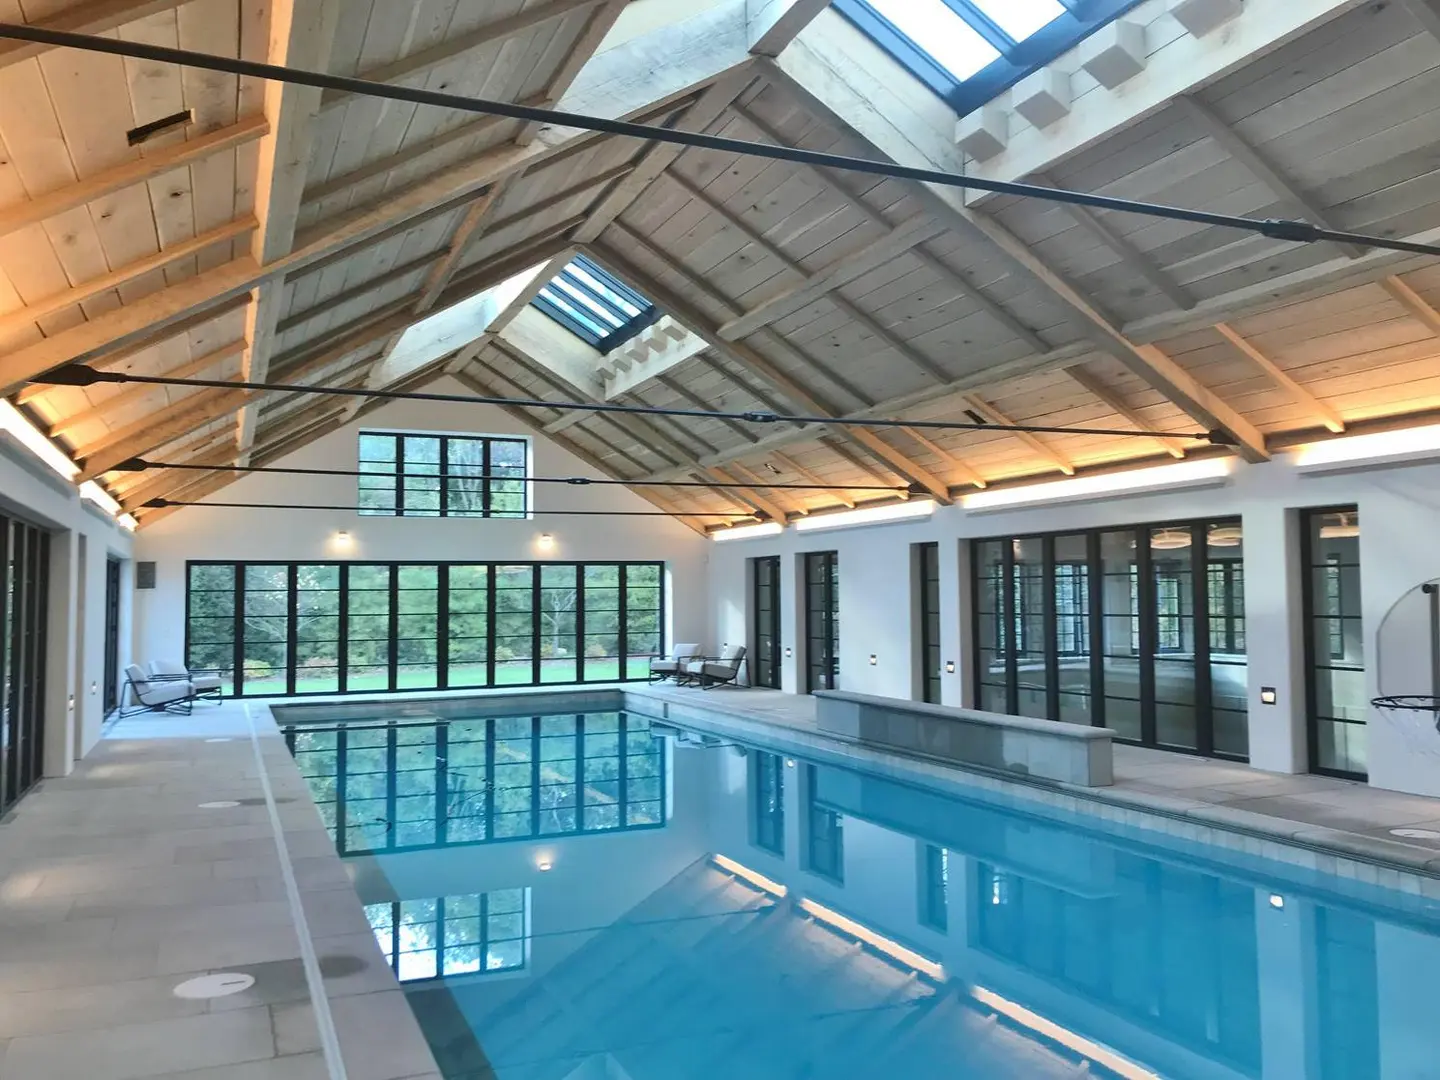 A large indoor swimming pool with skylights and a glass wall.